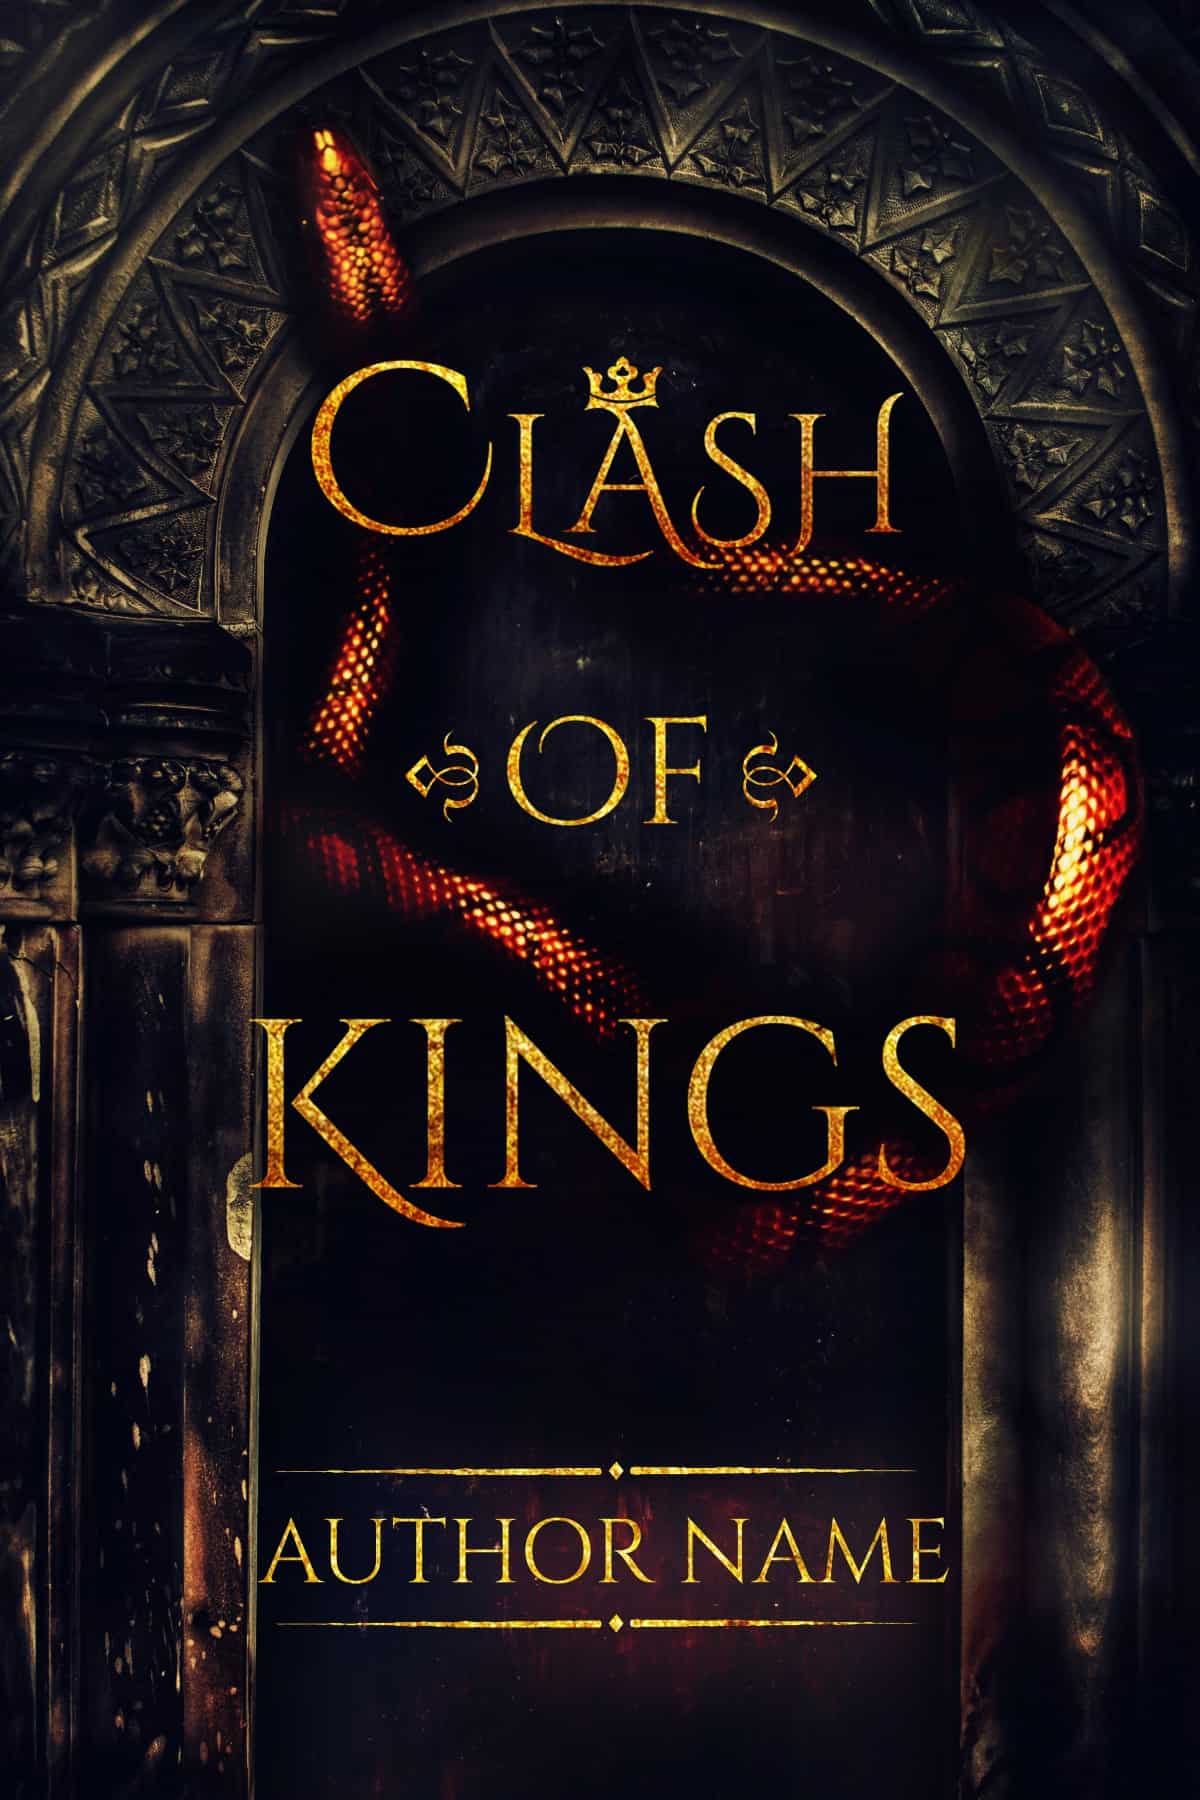 Clash of Kings - Clash of Kings updated their cover photo.